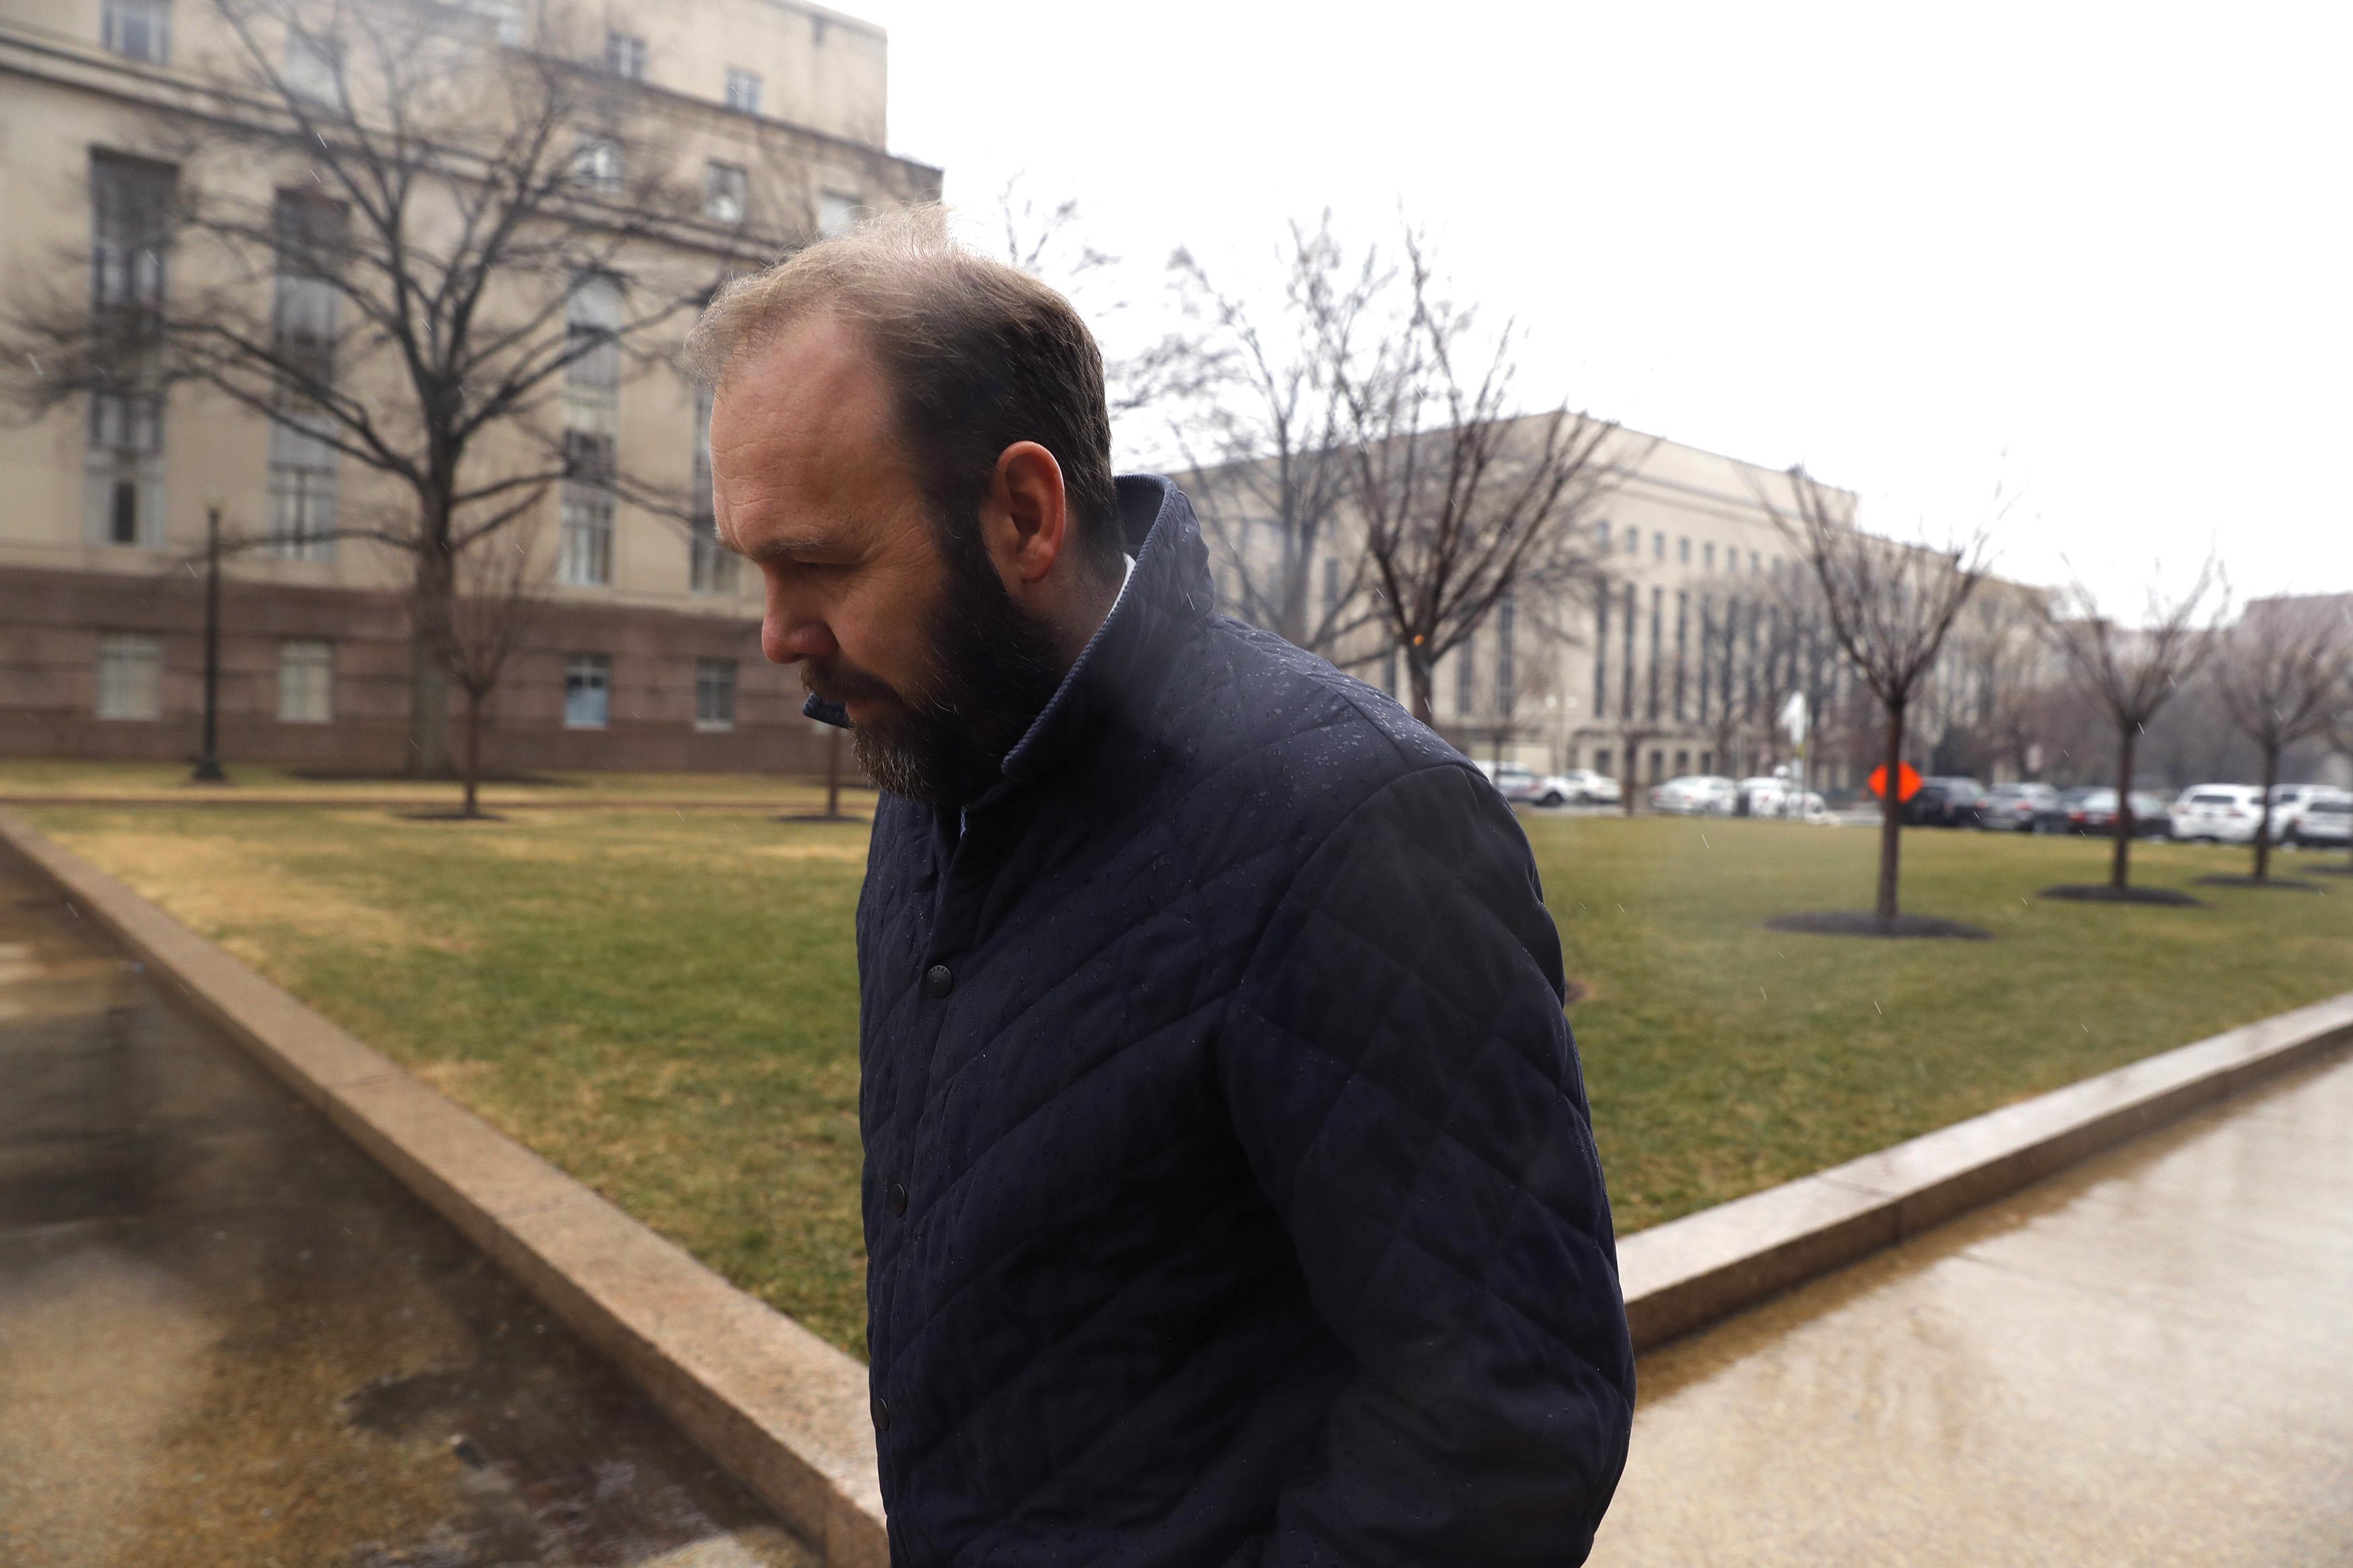 Former Trump Aide Rick Gates attends a hearing on his fraud, conspiracy and money-laundering charges at the E. Barrett Prettyman United States Courthouse on February 7, 2018 in Washington, D.C. 